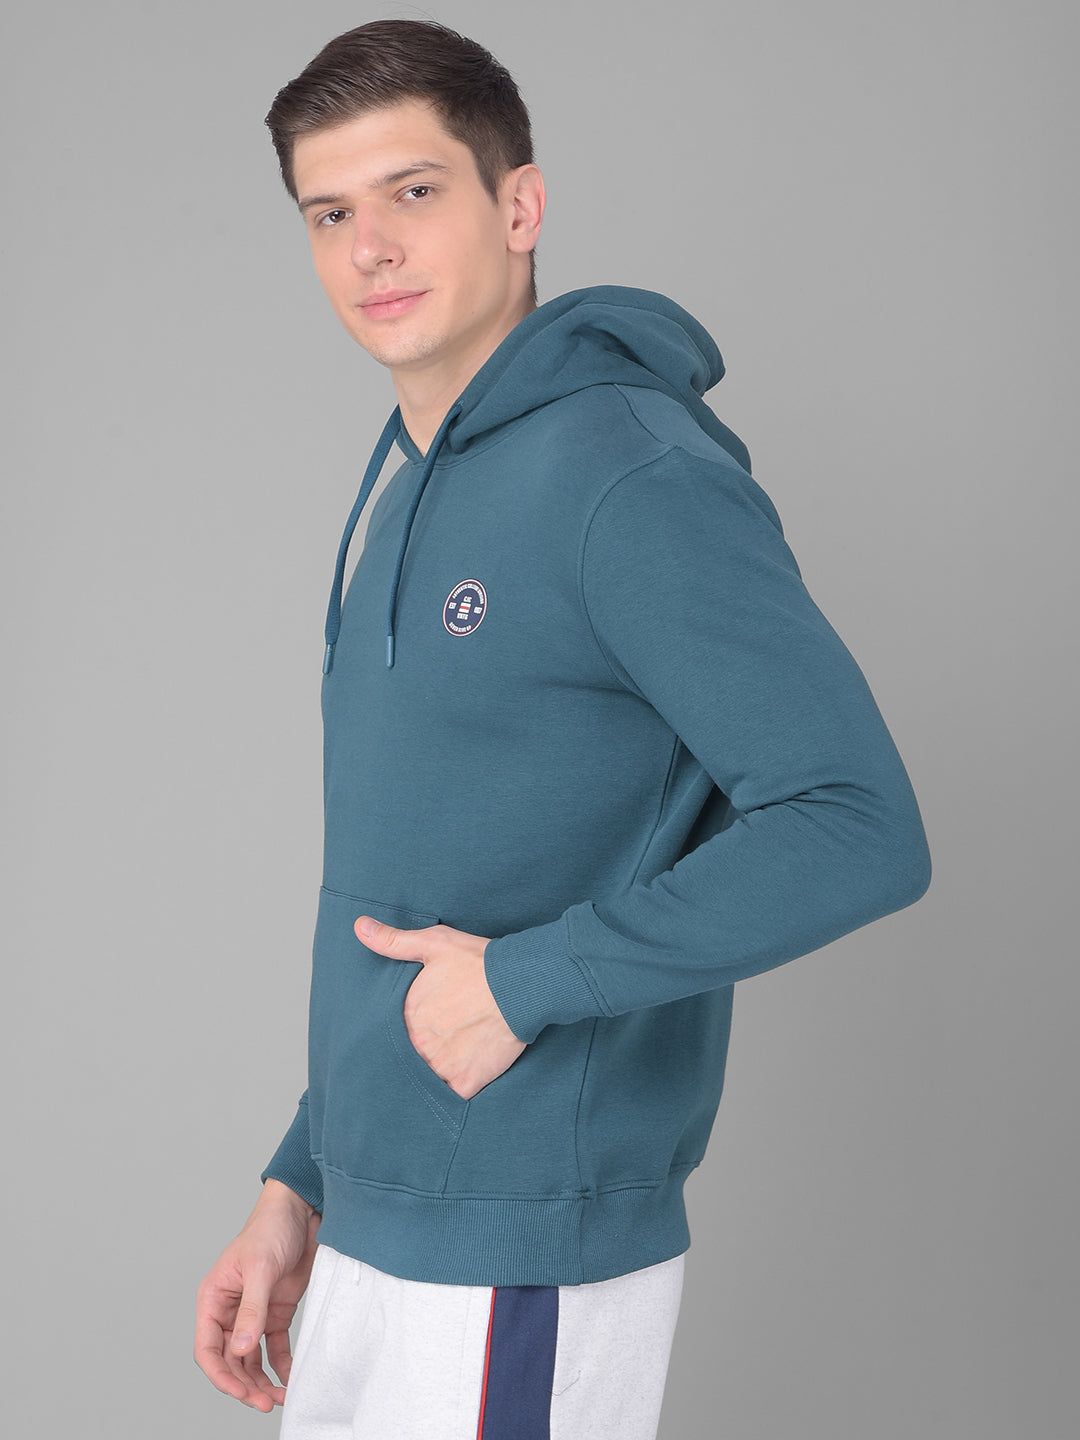 COBB SOLID TEAL CLASSIC HOODIE